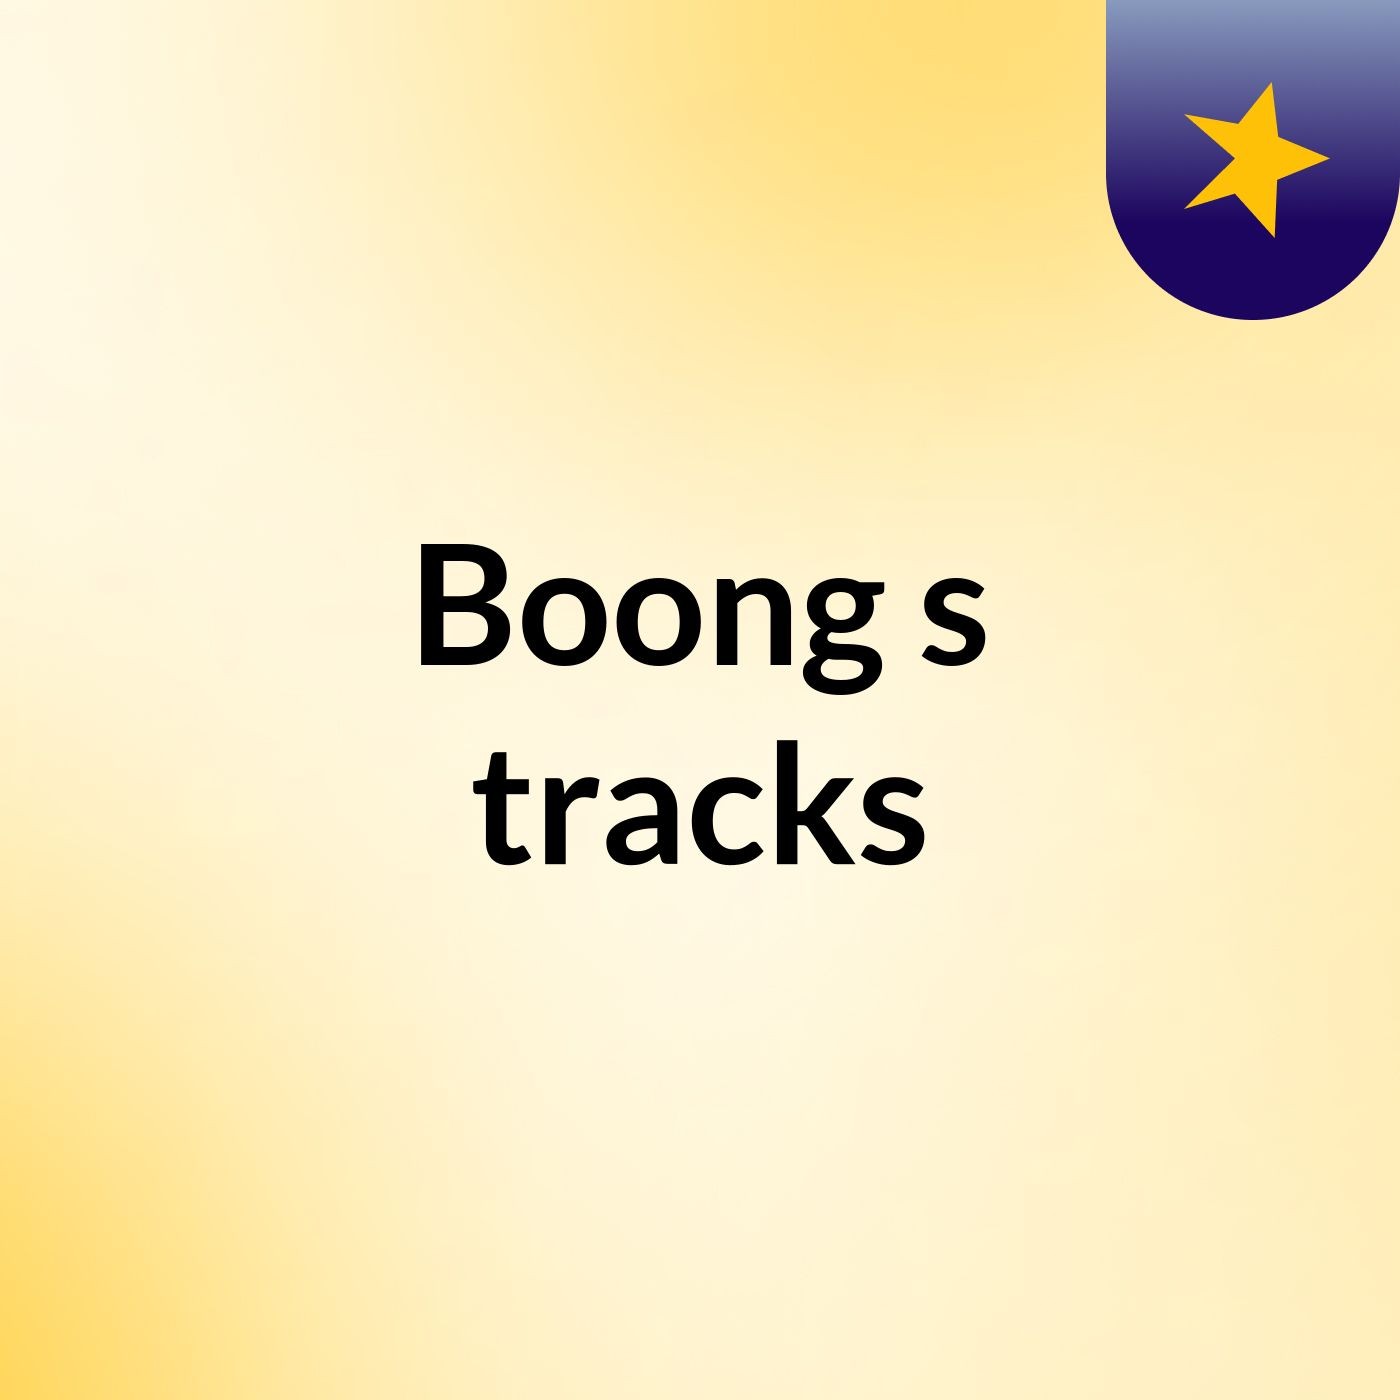 Boong's tracks